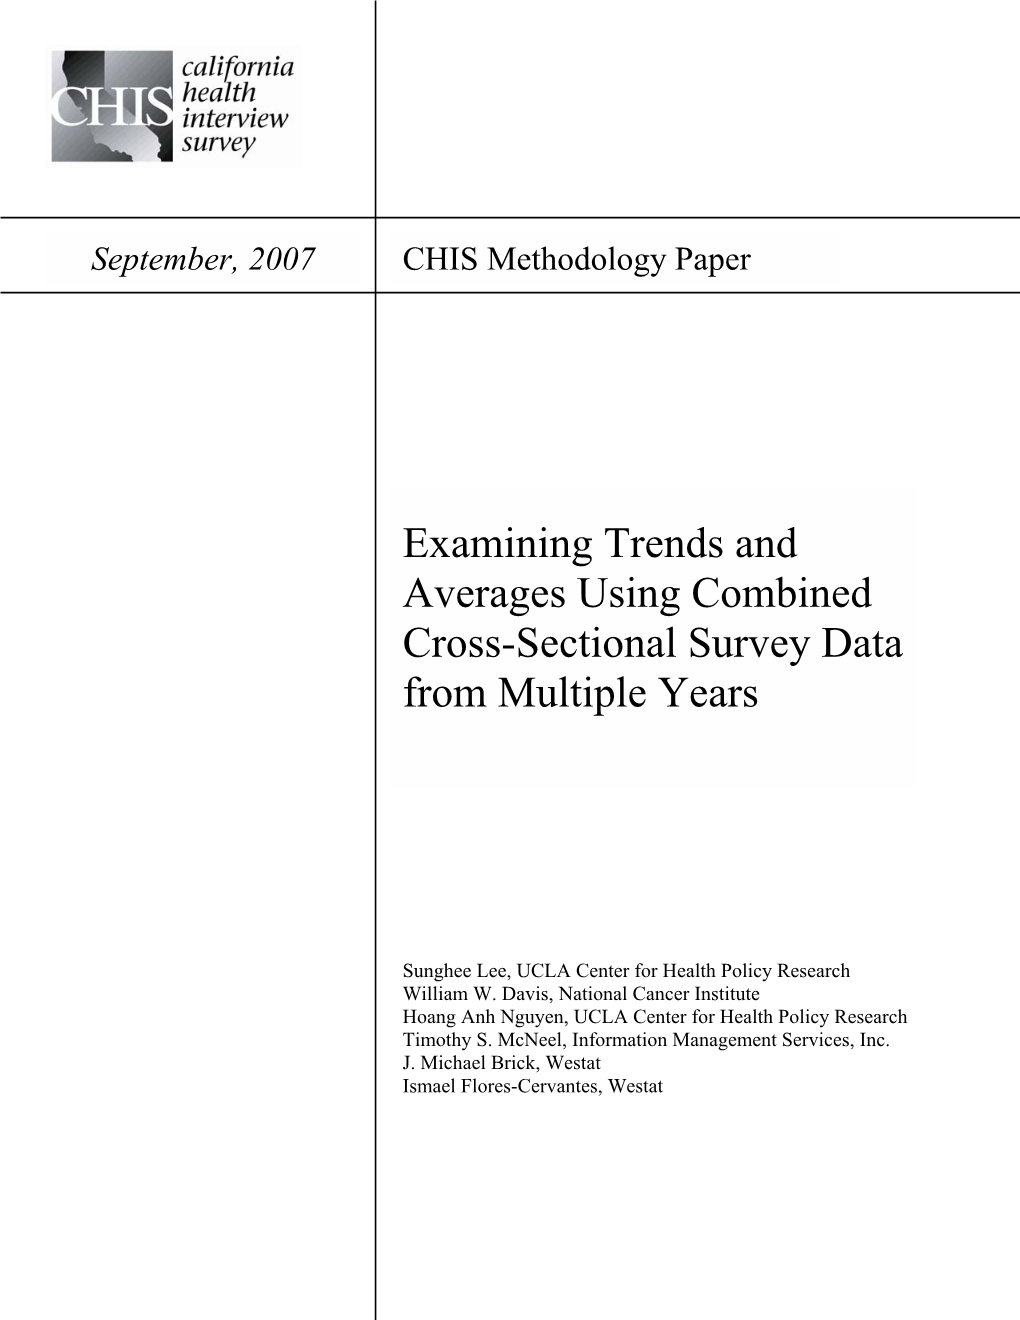 Examining Trends and Averages Using Combined Cross-Sectional Survey Data